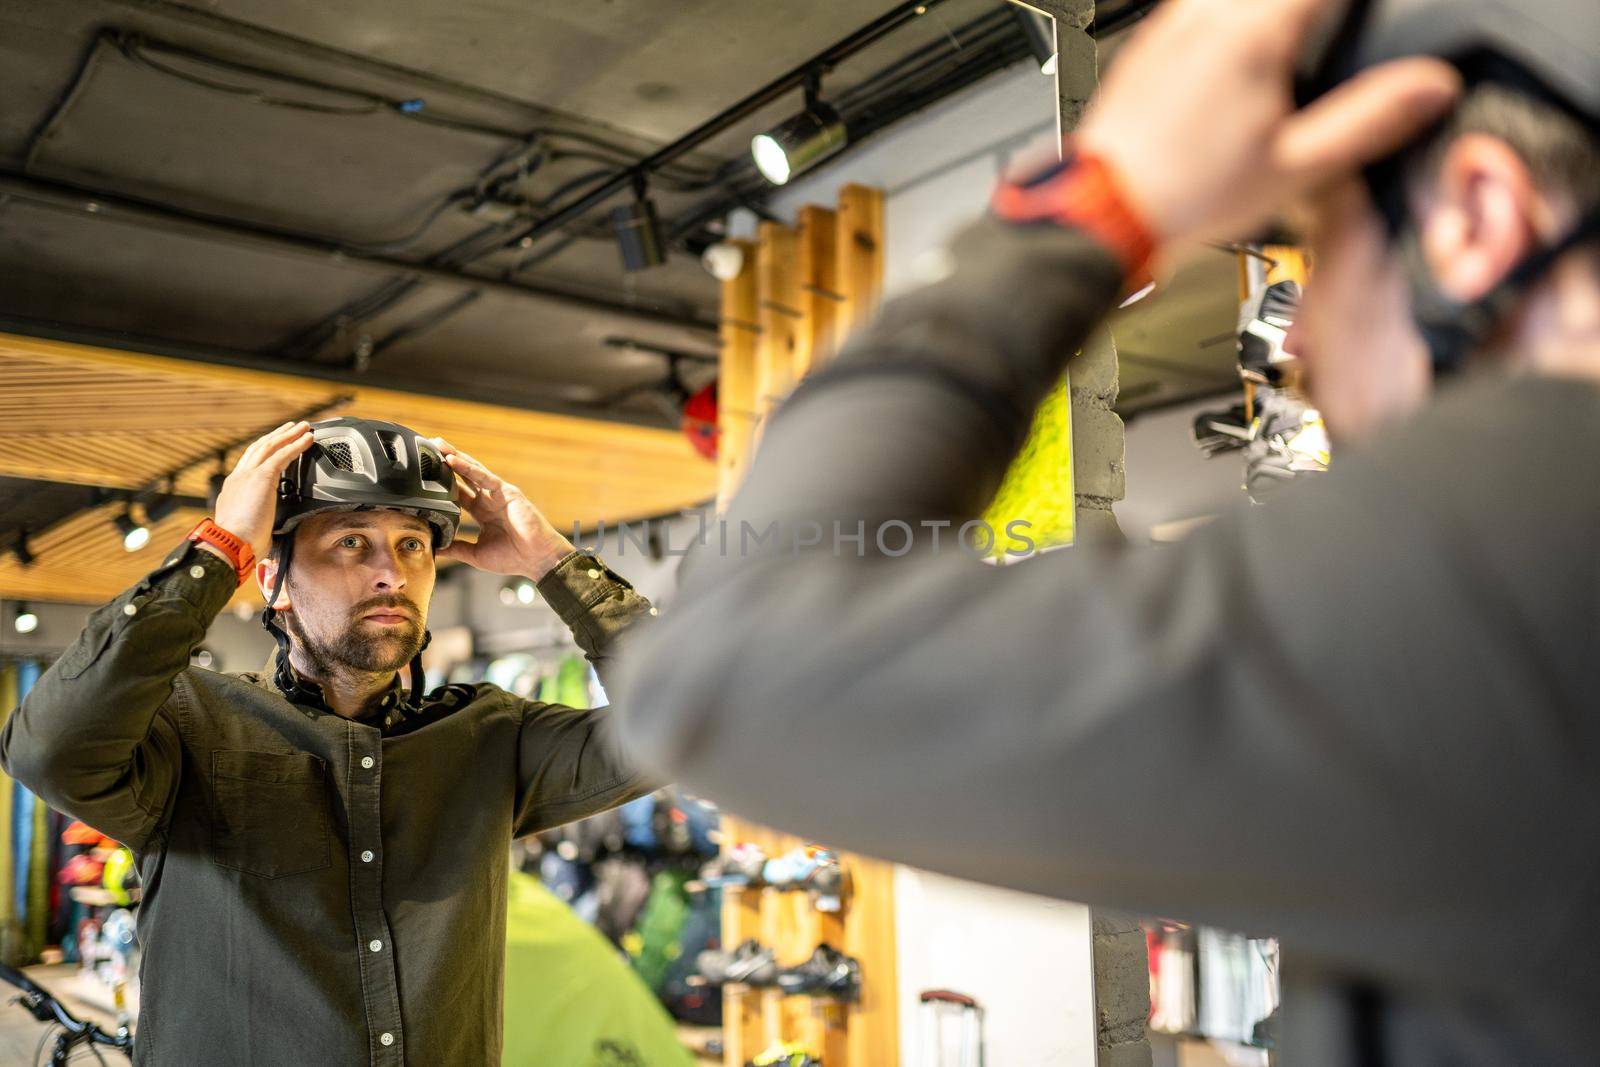 Young man came to the bicycle store. He is measuring the helmet. Male chooses helmet in sports equipment store. Purchase of new sports helmet. Customer with bicycle helmet trying on near the mirror by Tomashevska